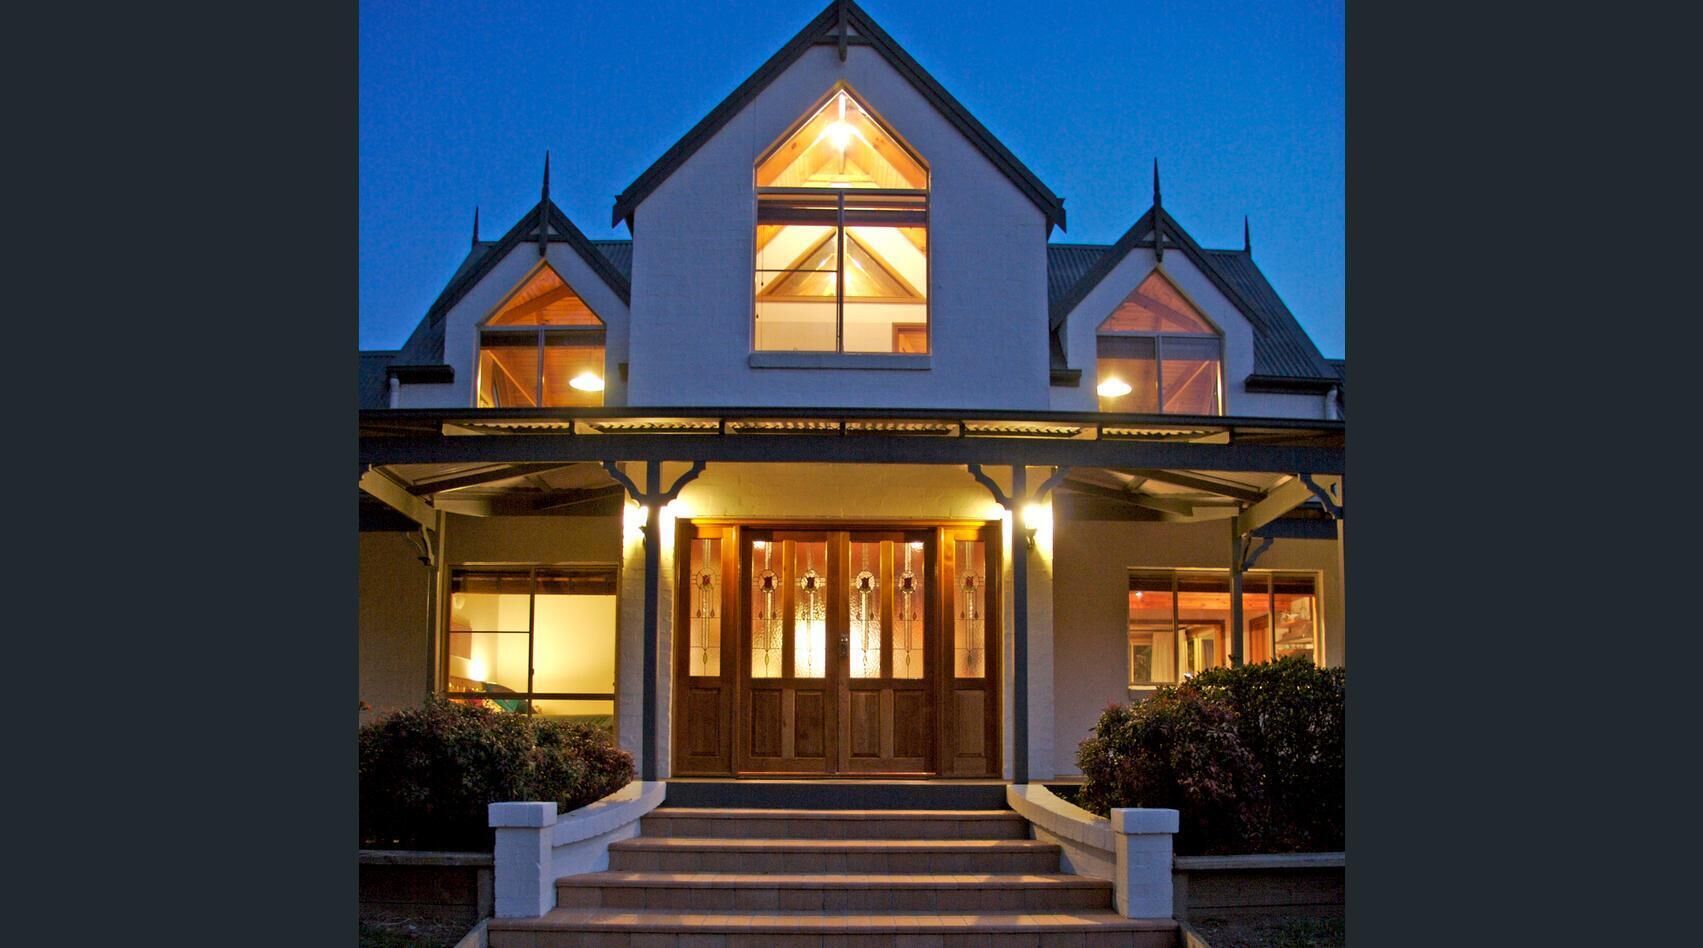 Bonville Estate is a semi rural resort- style home located in Bonville, NSW